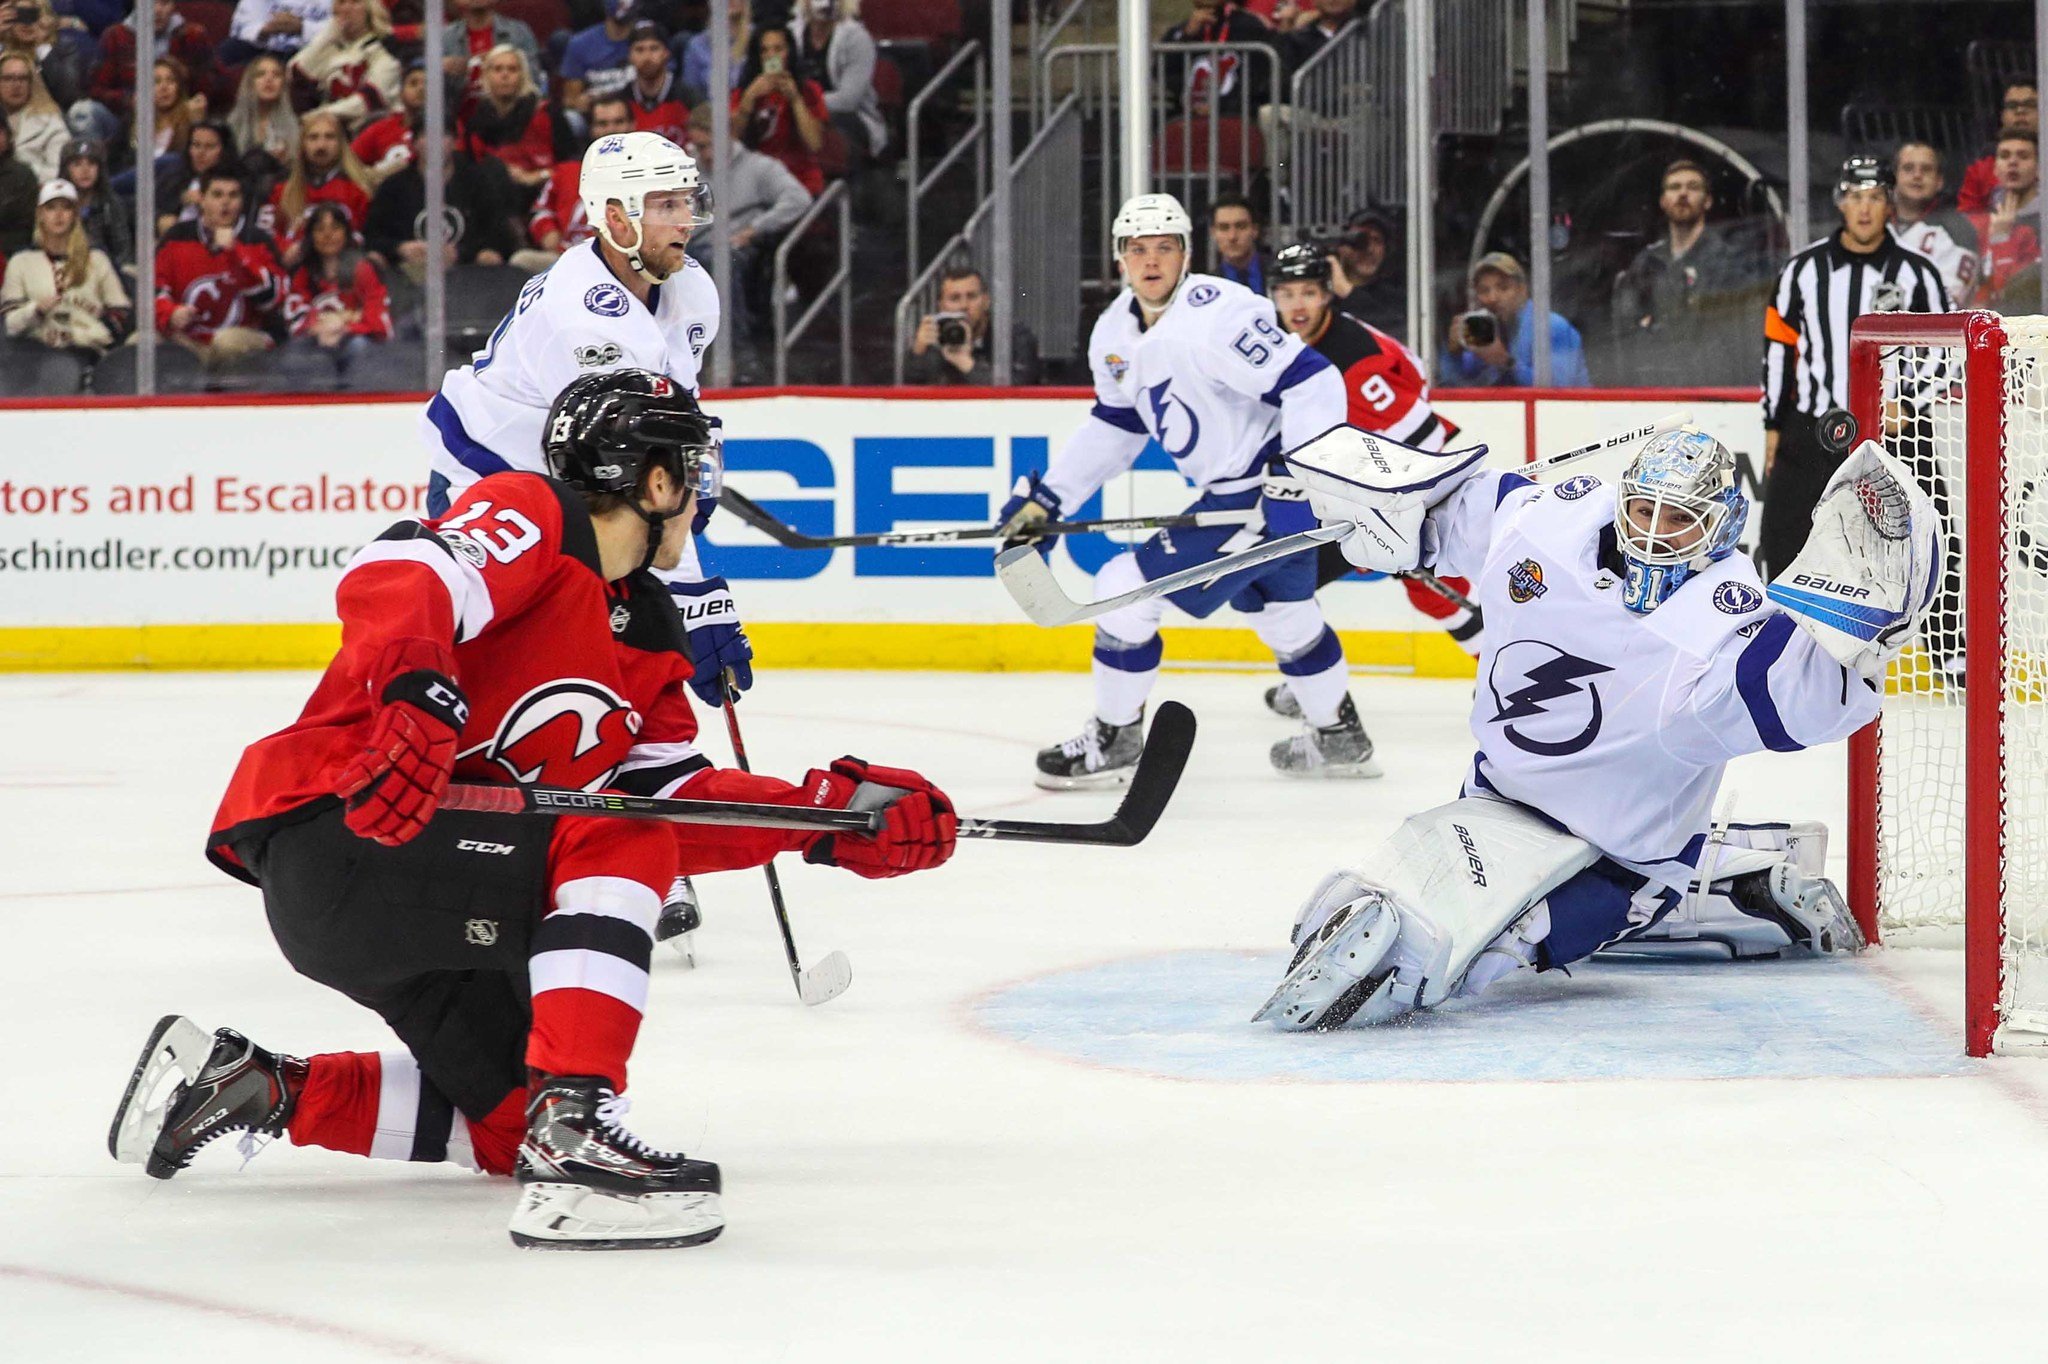 Devils Face Lightning For First Of Three This Week